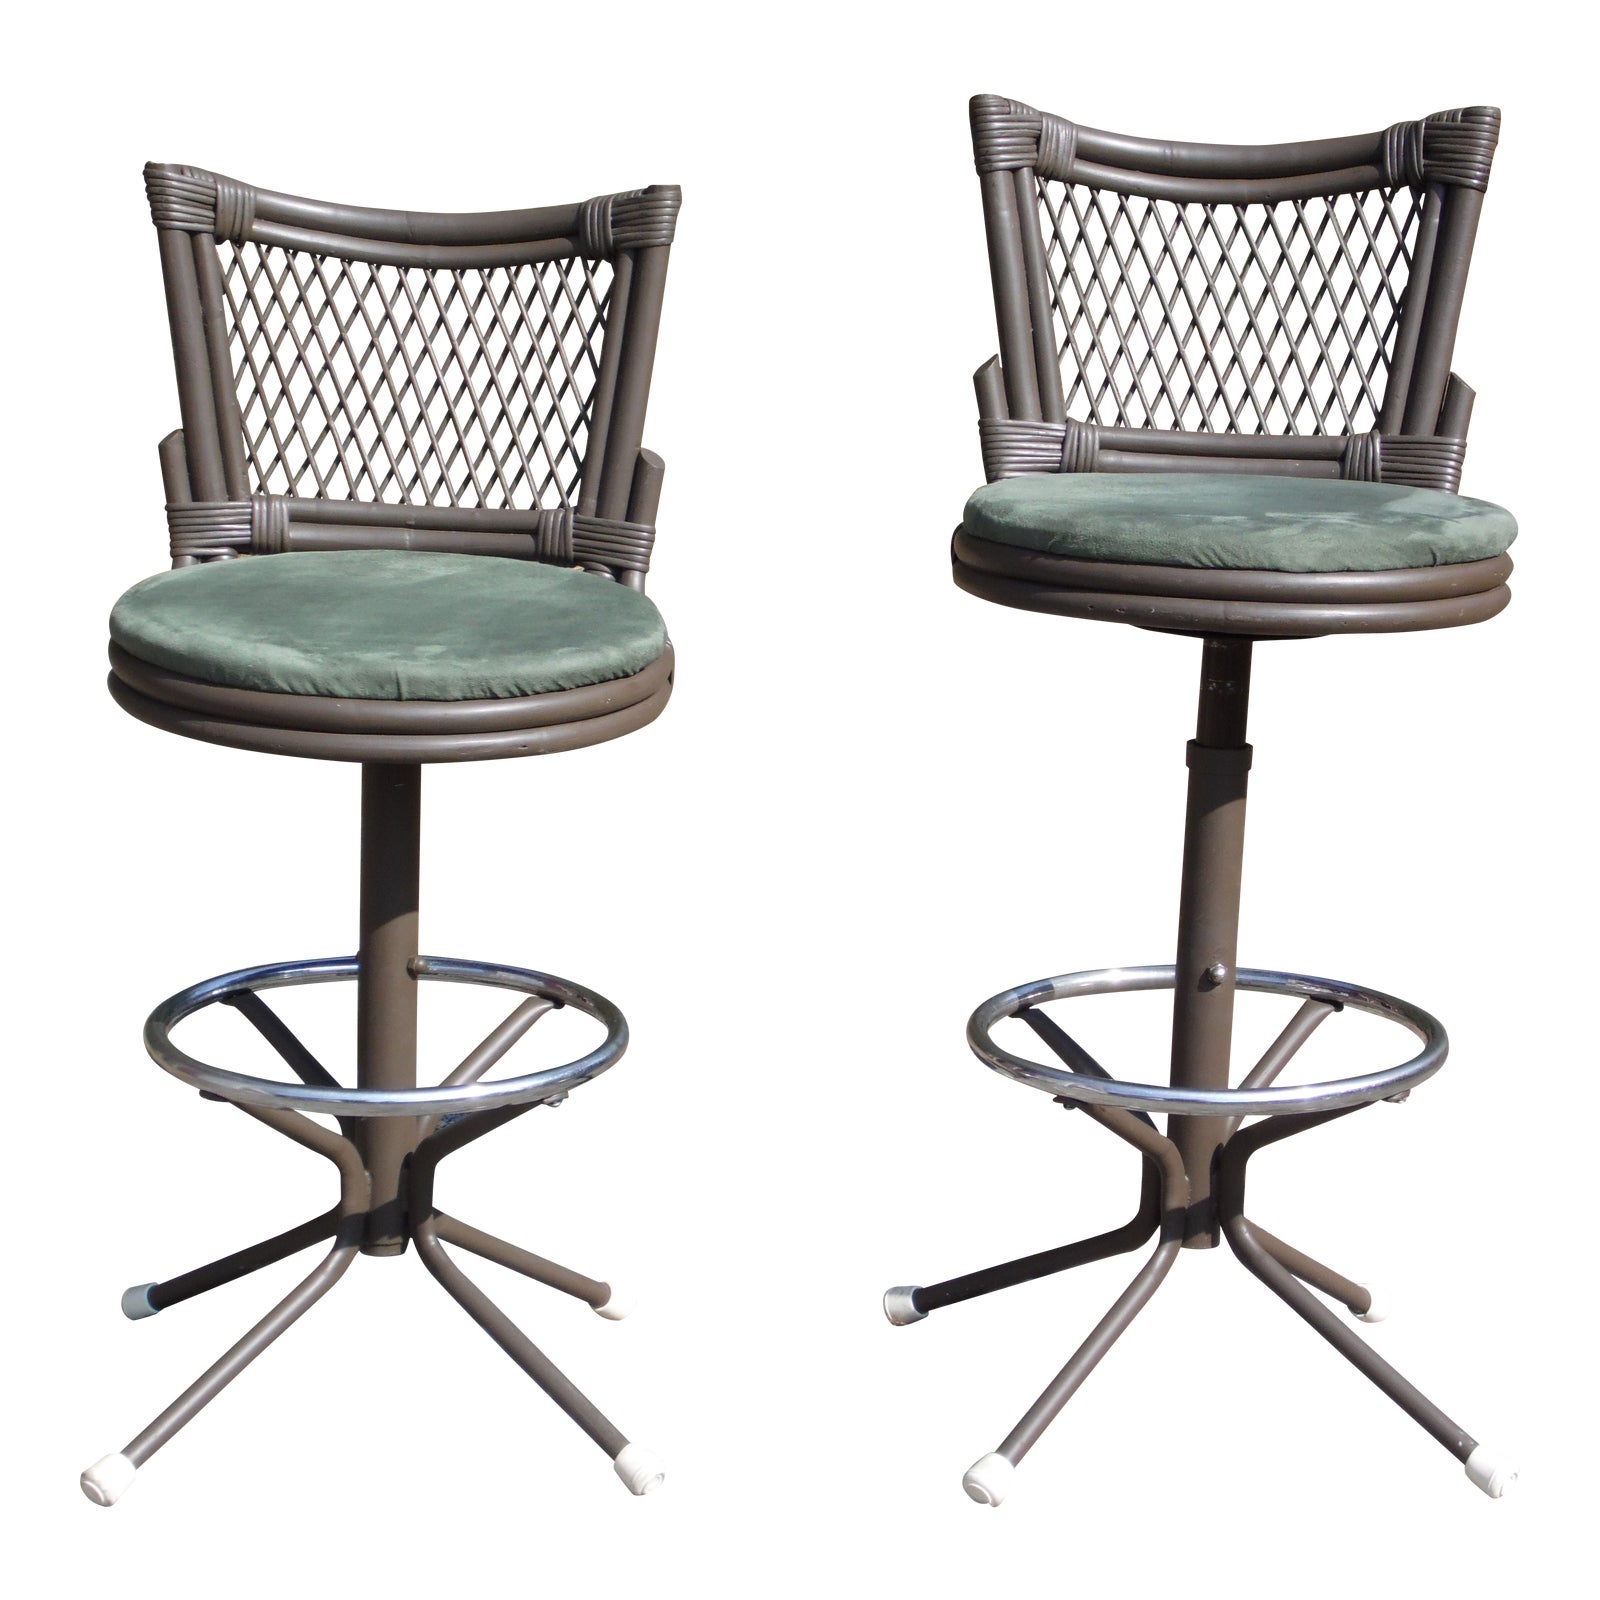 Vintage Pair Mid Century Modern Wrought, French Country Bar Stools Swivel Wrought Iron